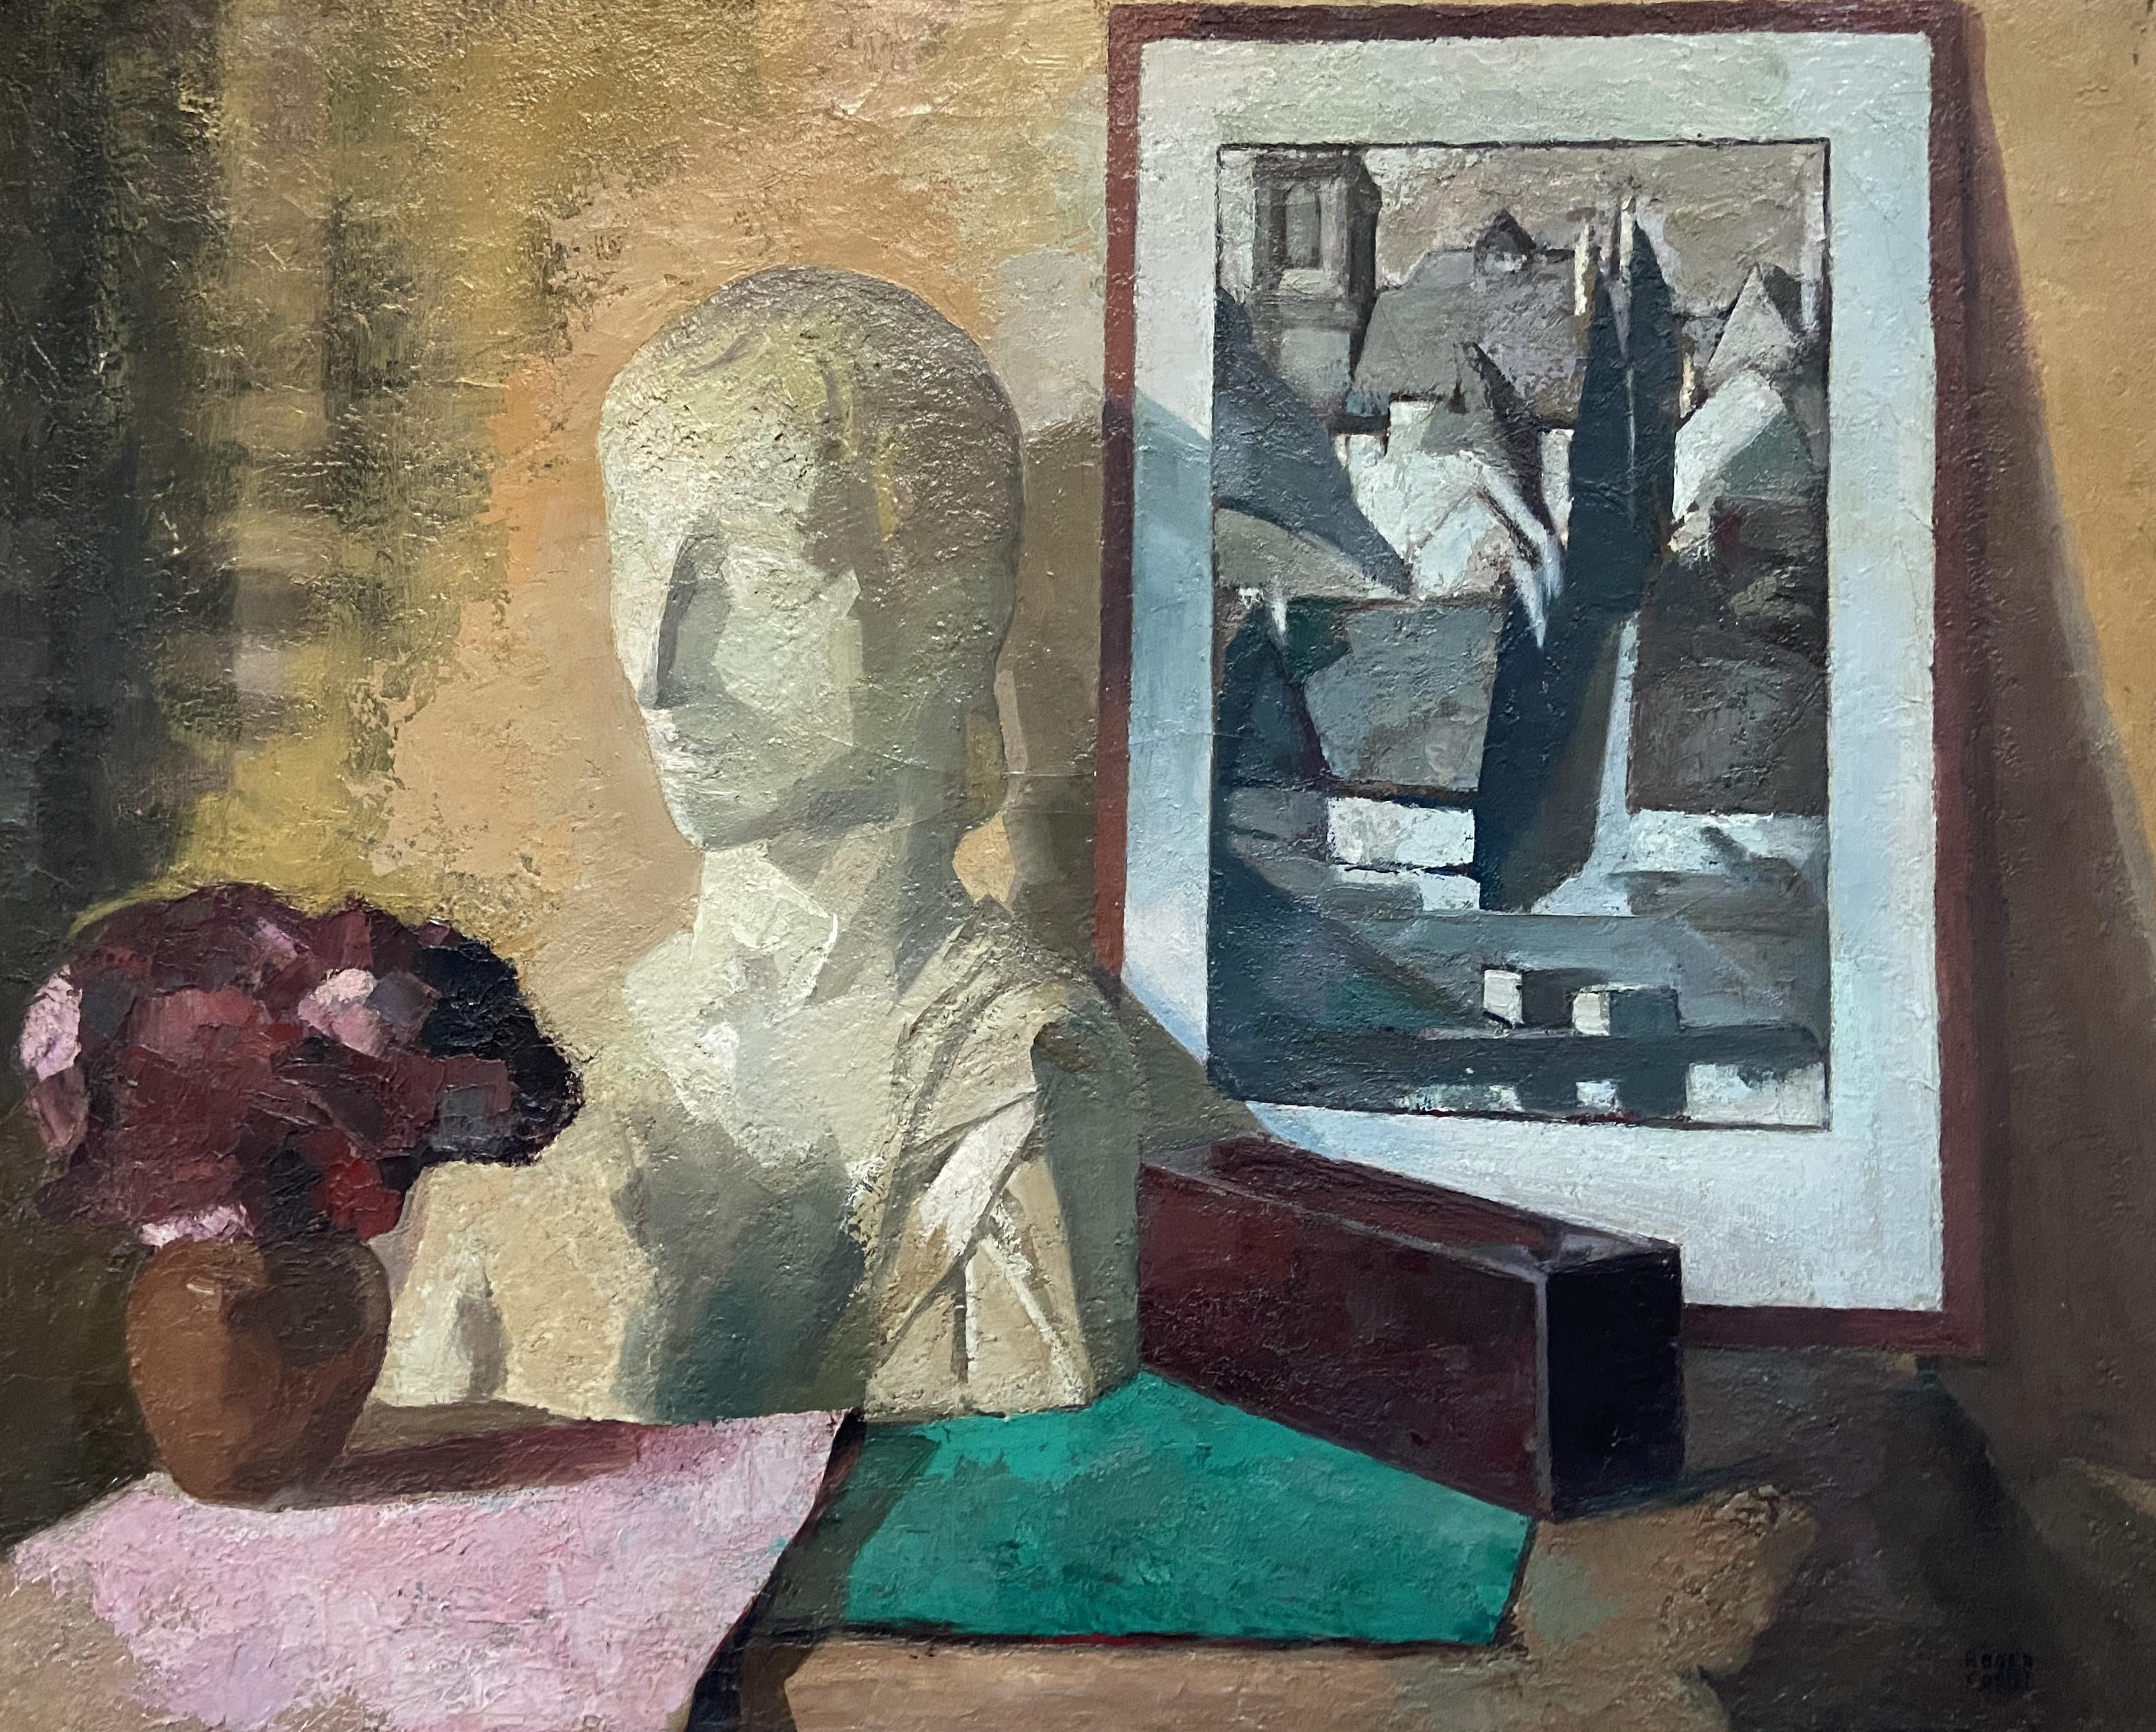 Roger Cortet (1910-1978)
Still-life with a white sculpture
Oil on canvas
Signed lower right
64 x 80 cm
Framed : 70 x 85.5 cm
There is a small but inconspicuous hole in the frame groove at the fastener.
 
This rare painting by Roger Cortet is typical